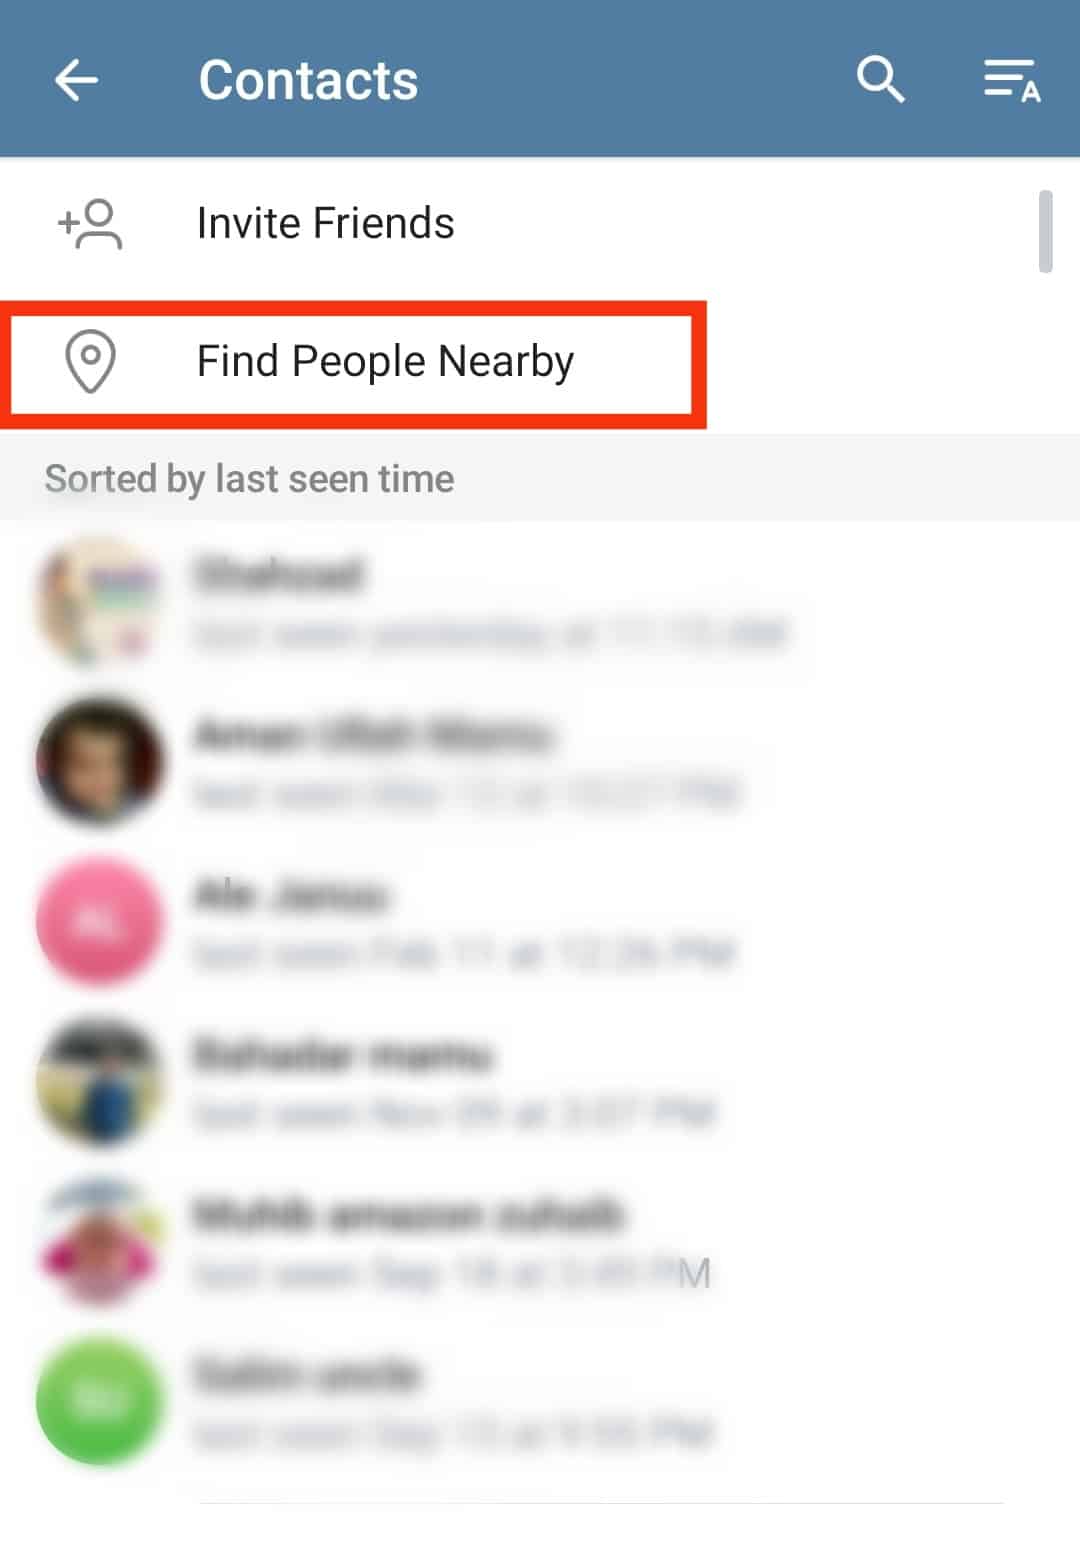 Tap Find People Nearby